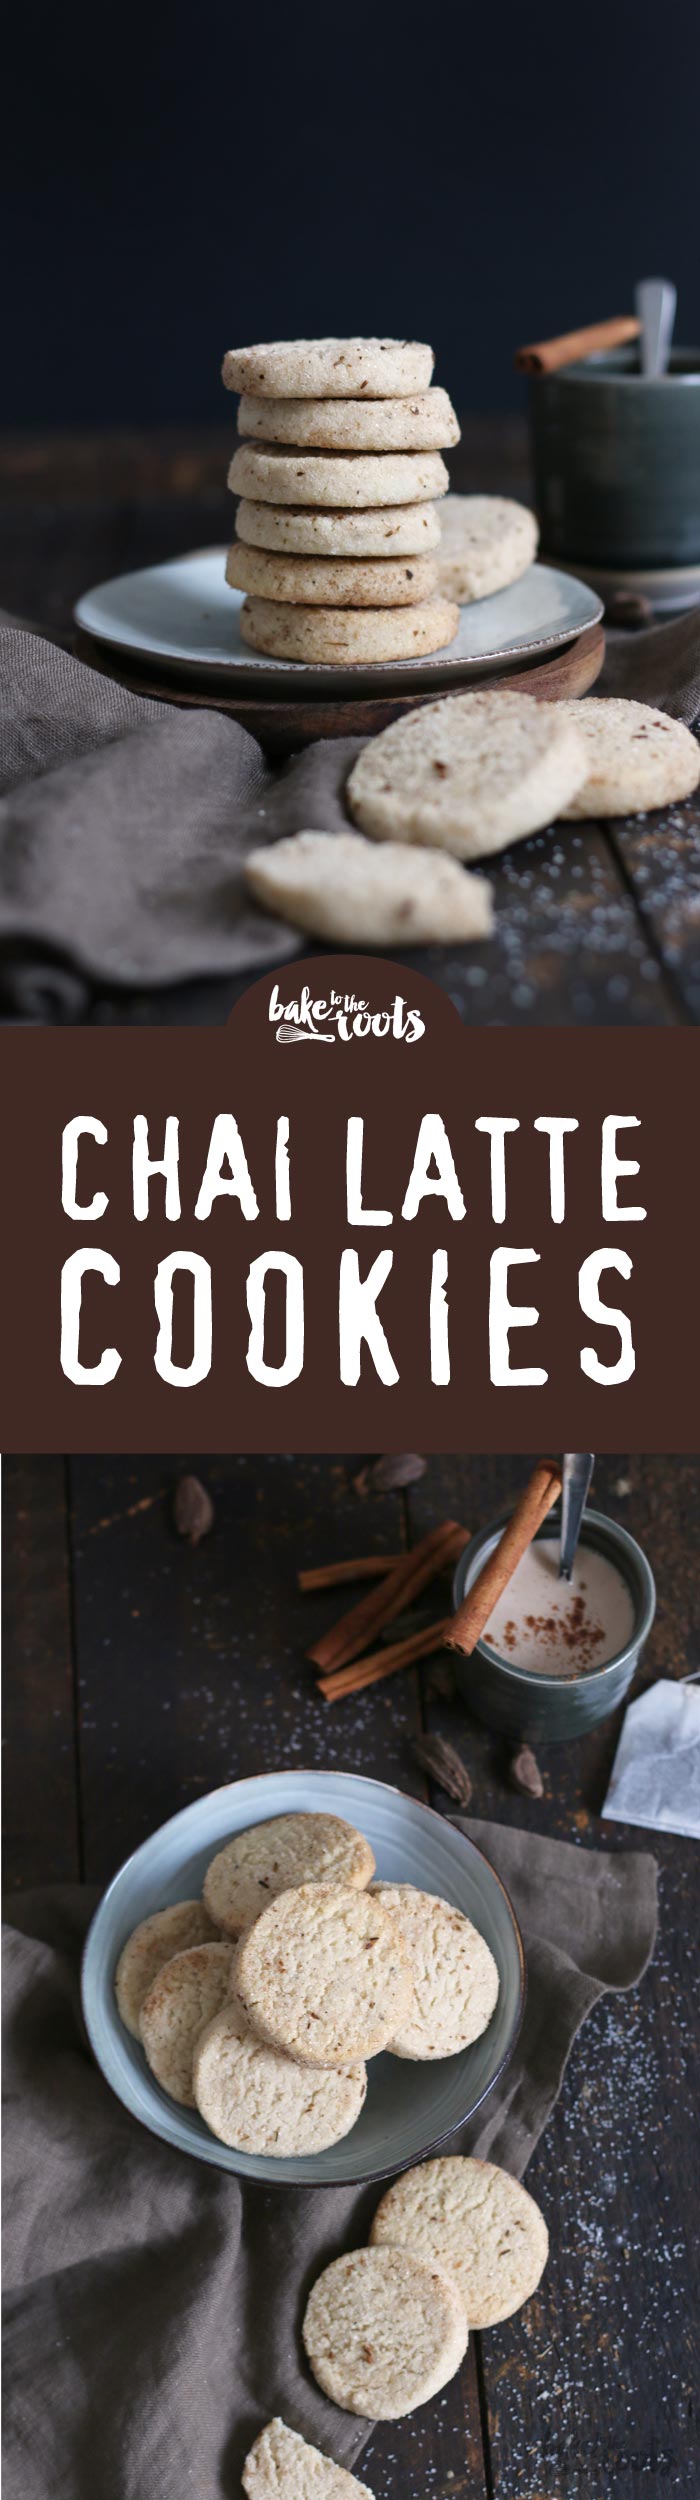 Leckere Chai Latte Cookies | Bake to the roots